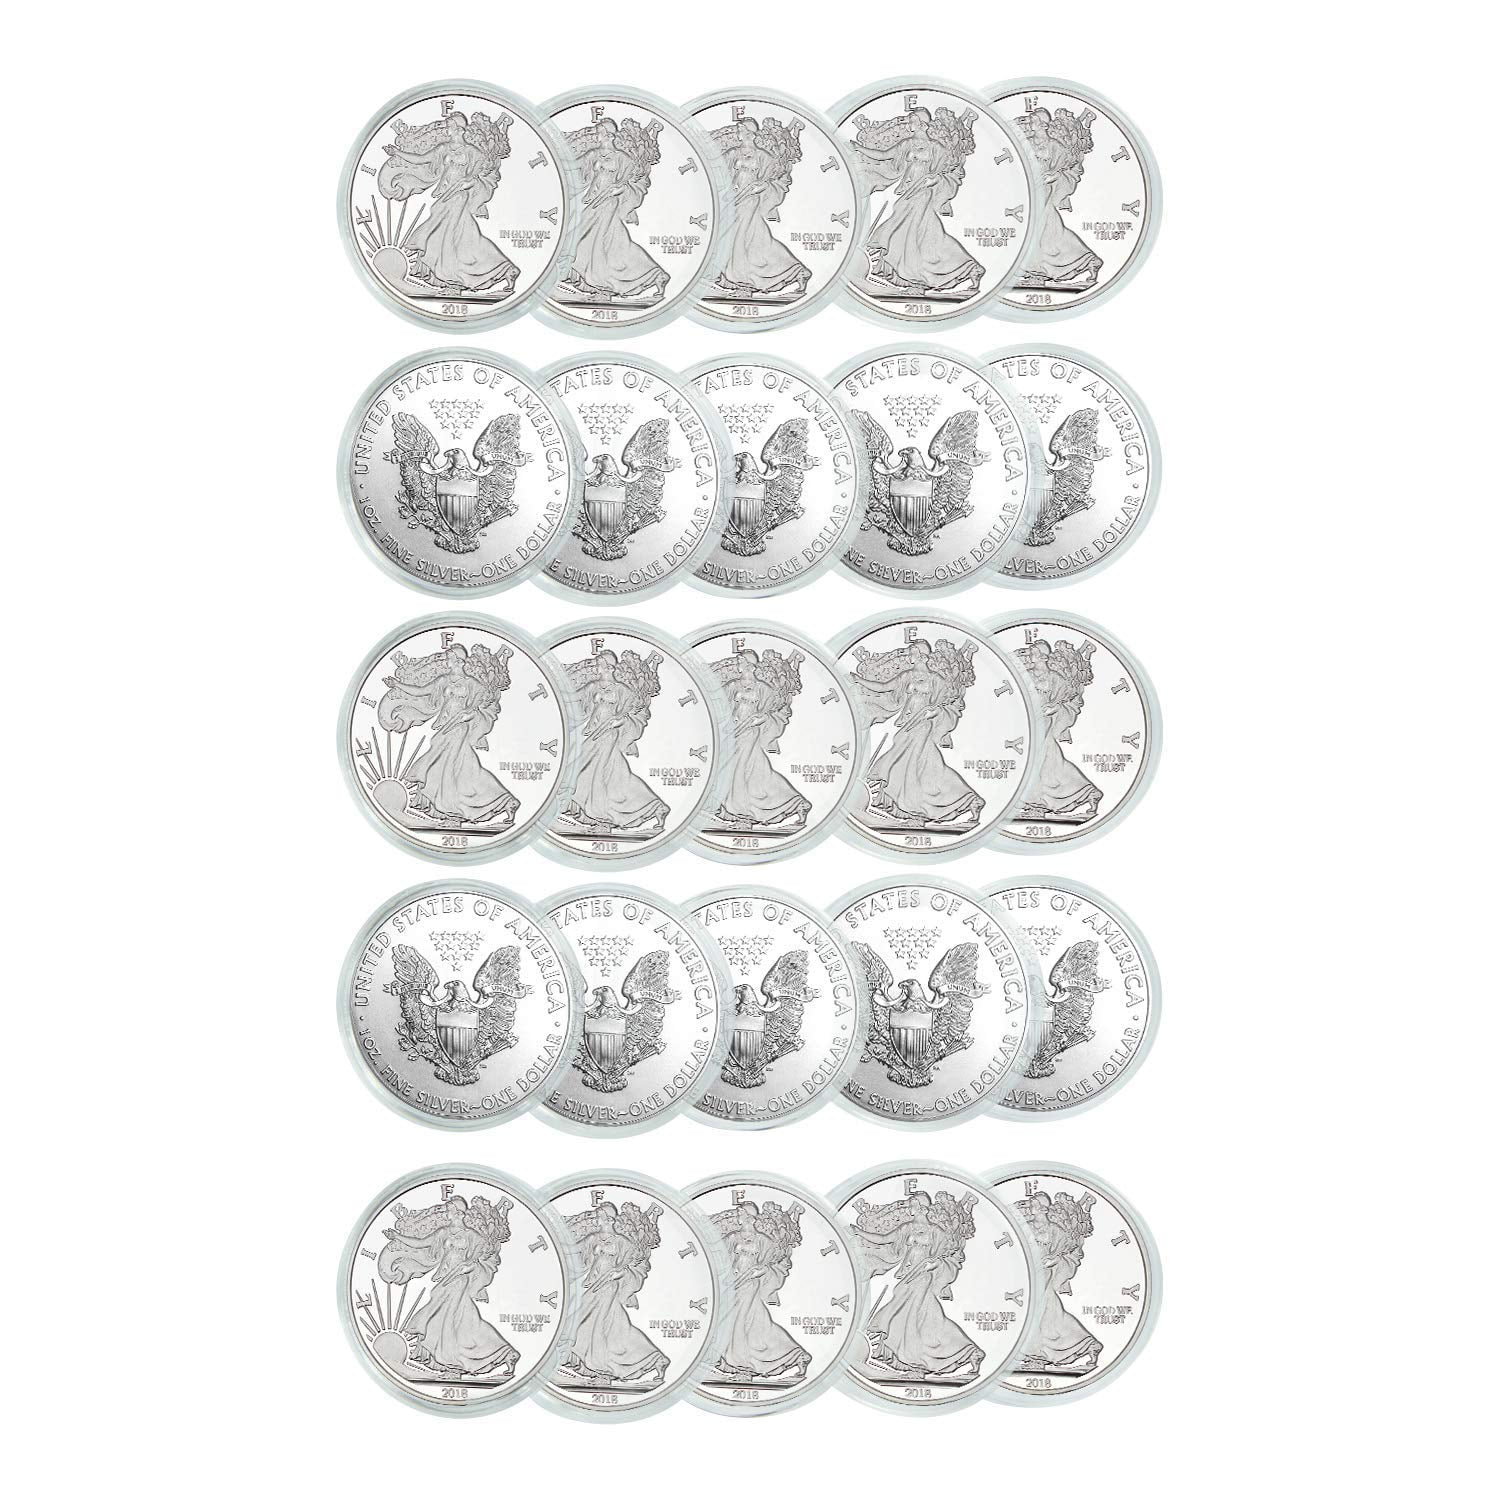 Plastic Air Tite Dollar Coins Capsules Silver Eagle Protector Clear American Collectors Cases Tight Treasures Storage Containers Collection Supplies Houseables Coin Holder 25 Pack 40 mm